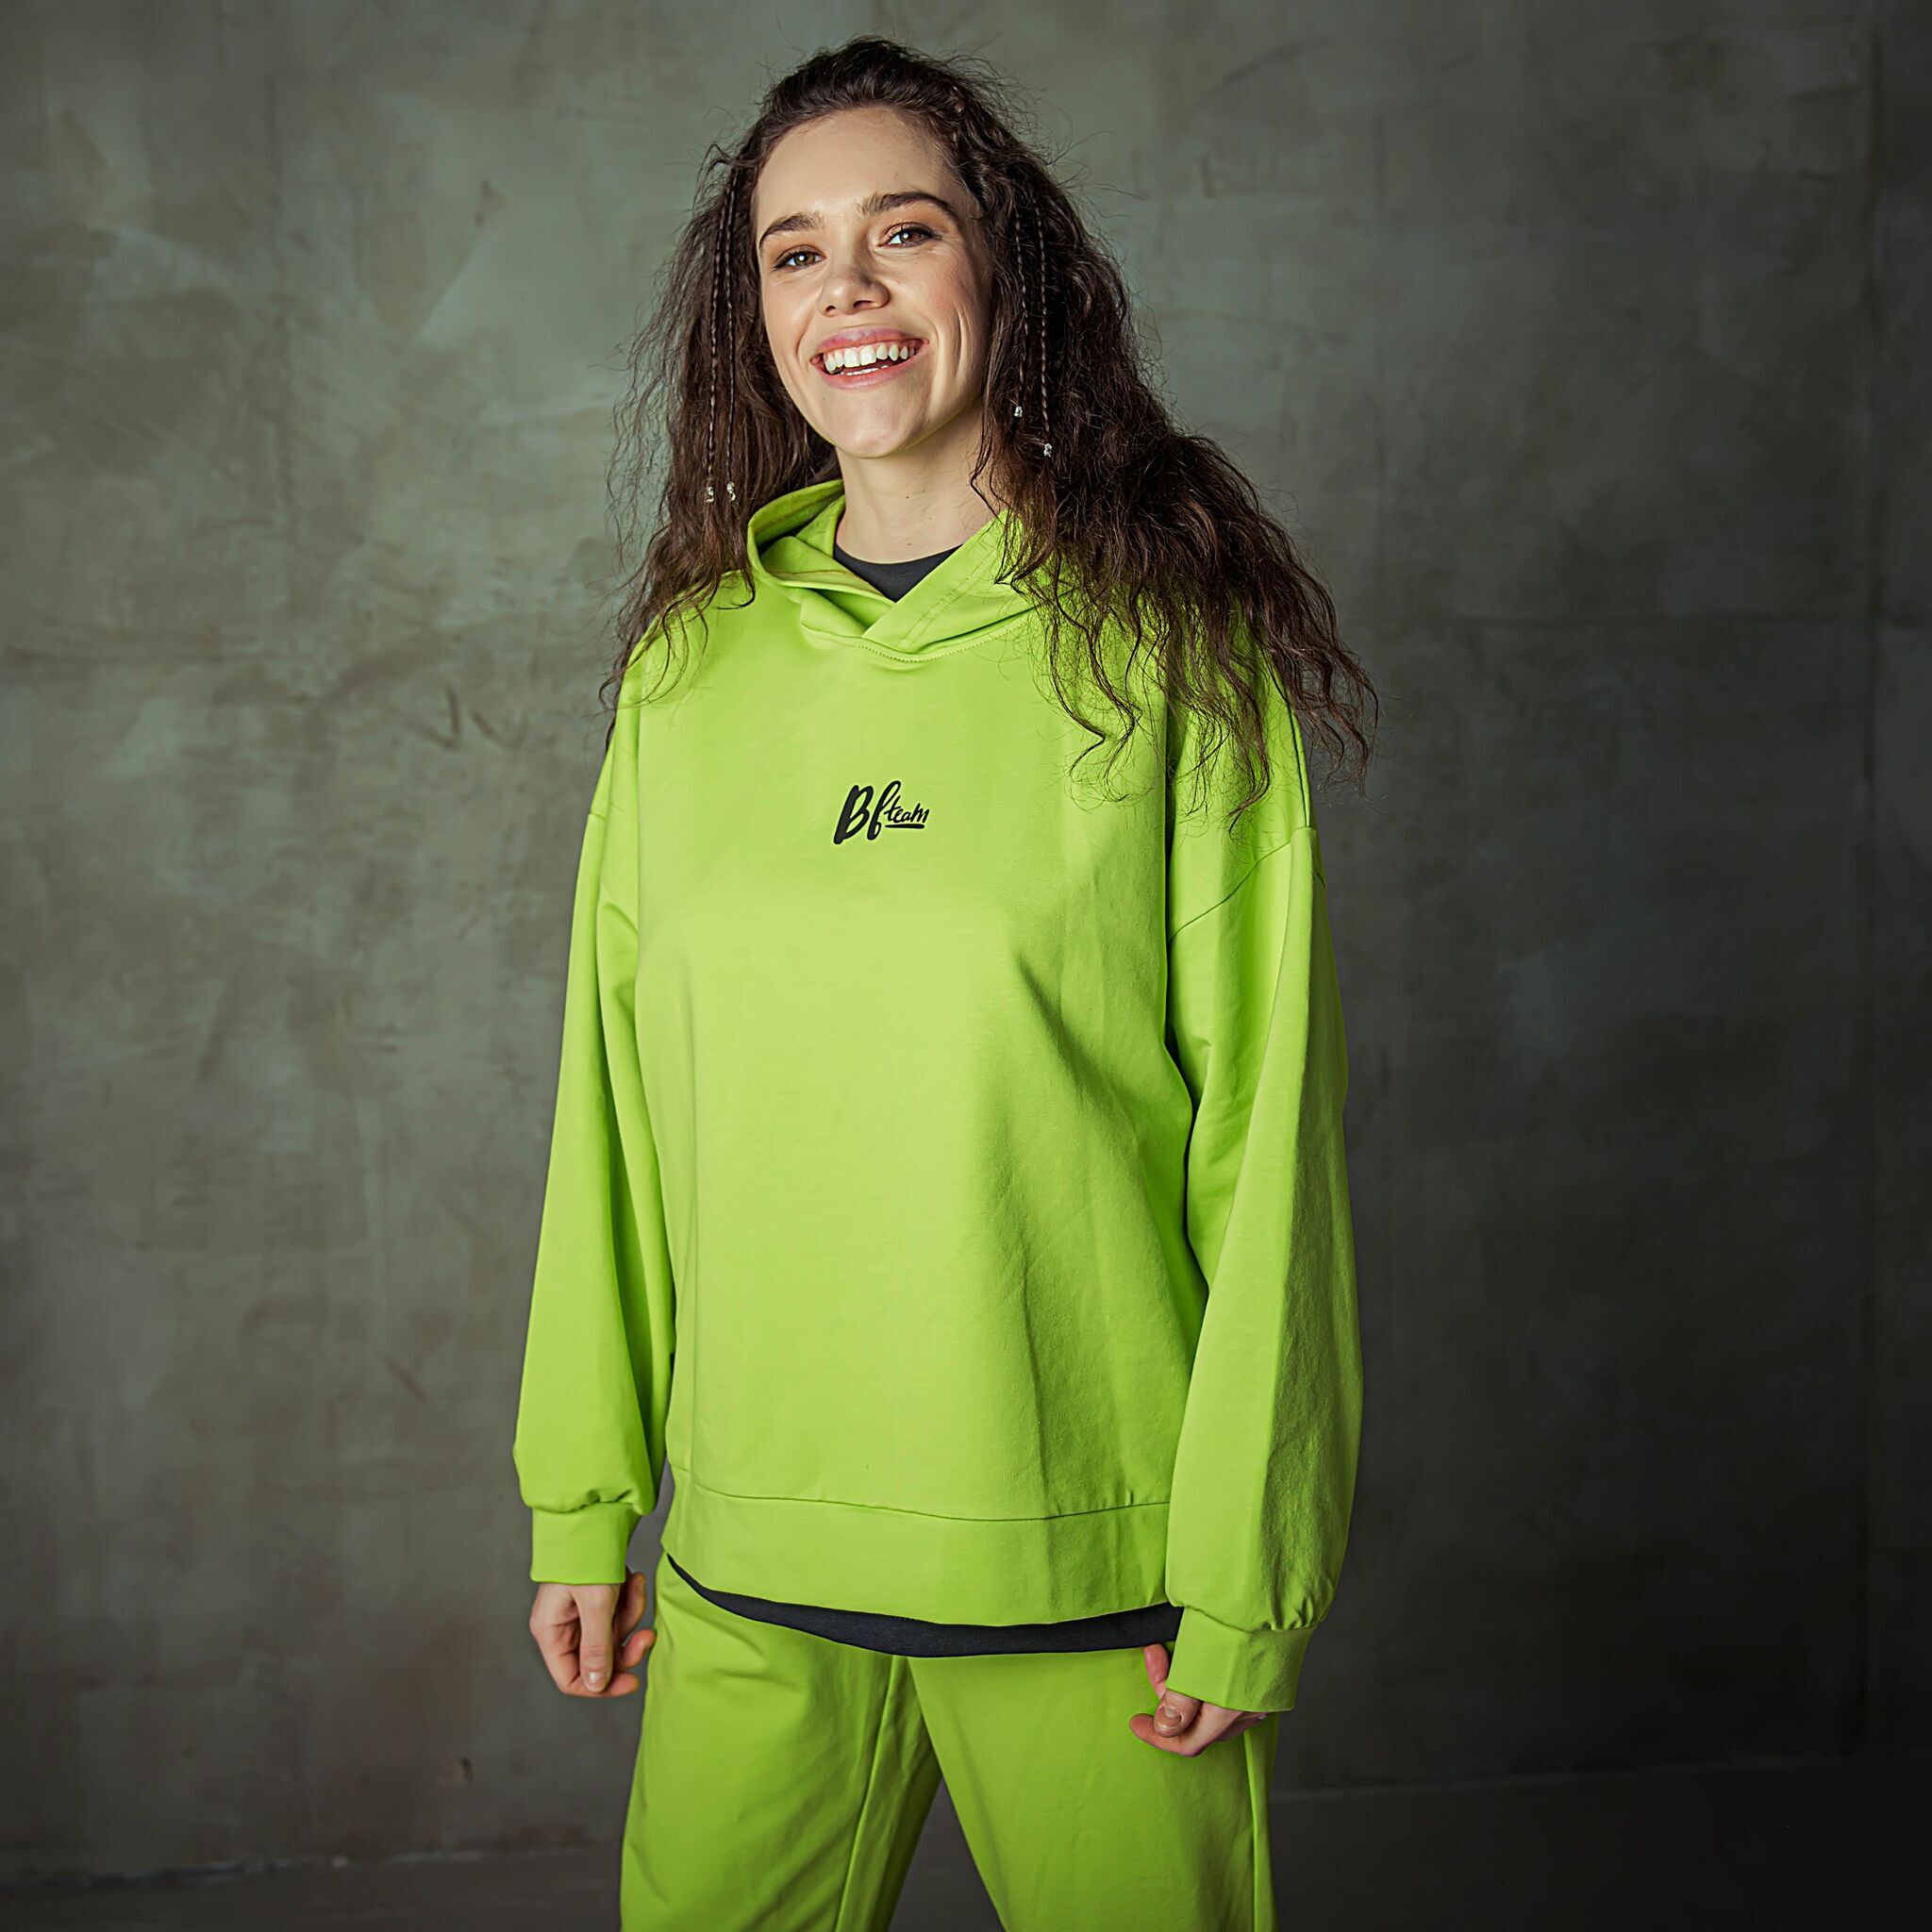 Bb team oversized hoodie for women - Lime